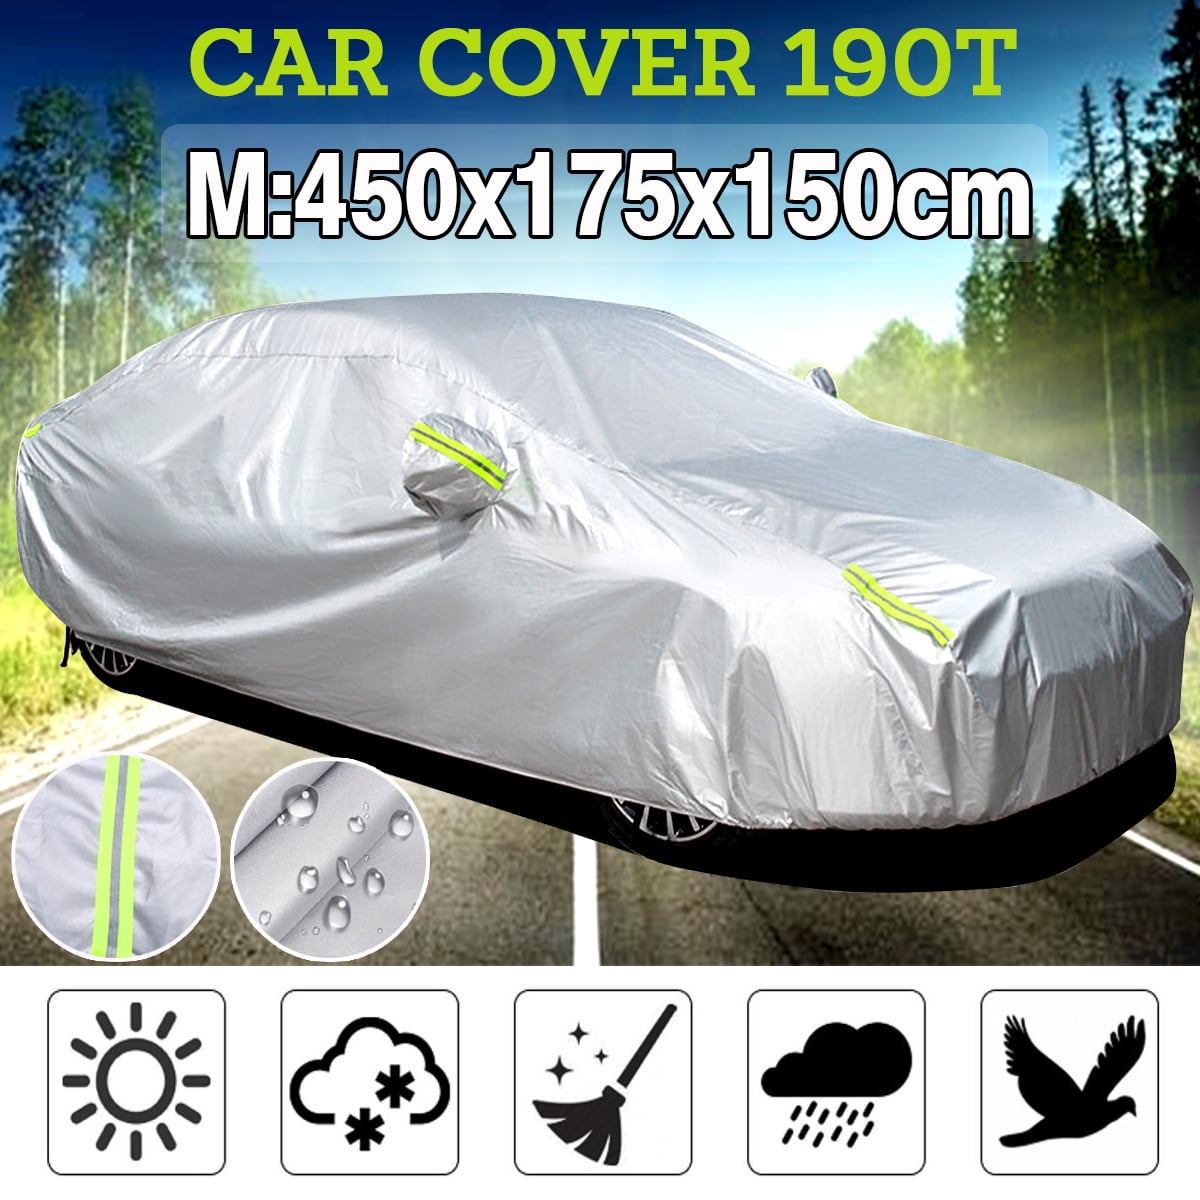 Fits up to 206 YITAMOTOR SUV Cover Car Snow Cover UV Protection Breathable Soft Aluminum Full Size Car Cover Waterproof Windproof Dustproof Scratch Resistant for Outdoor Indoor Use 